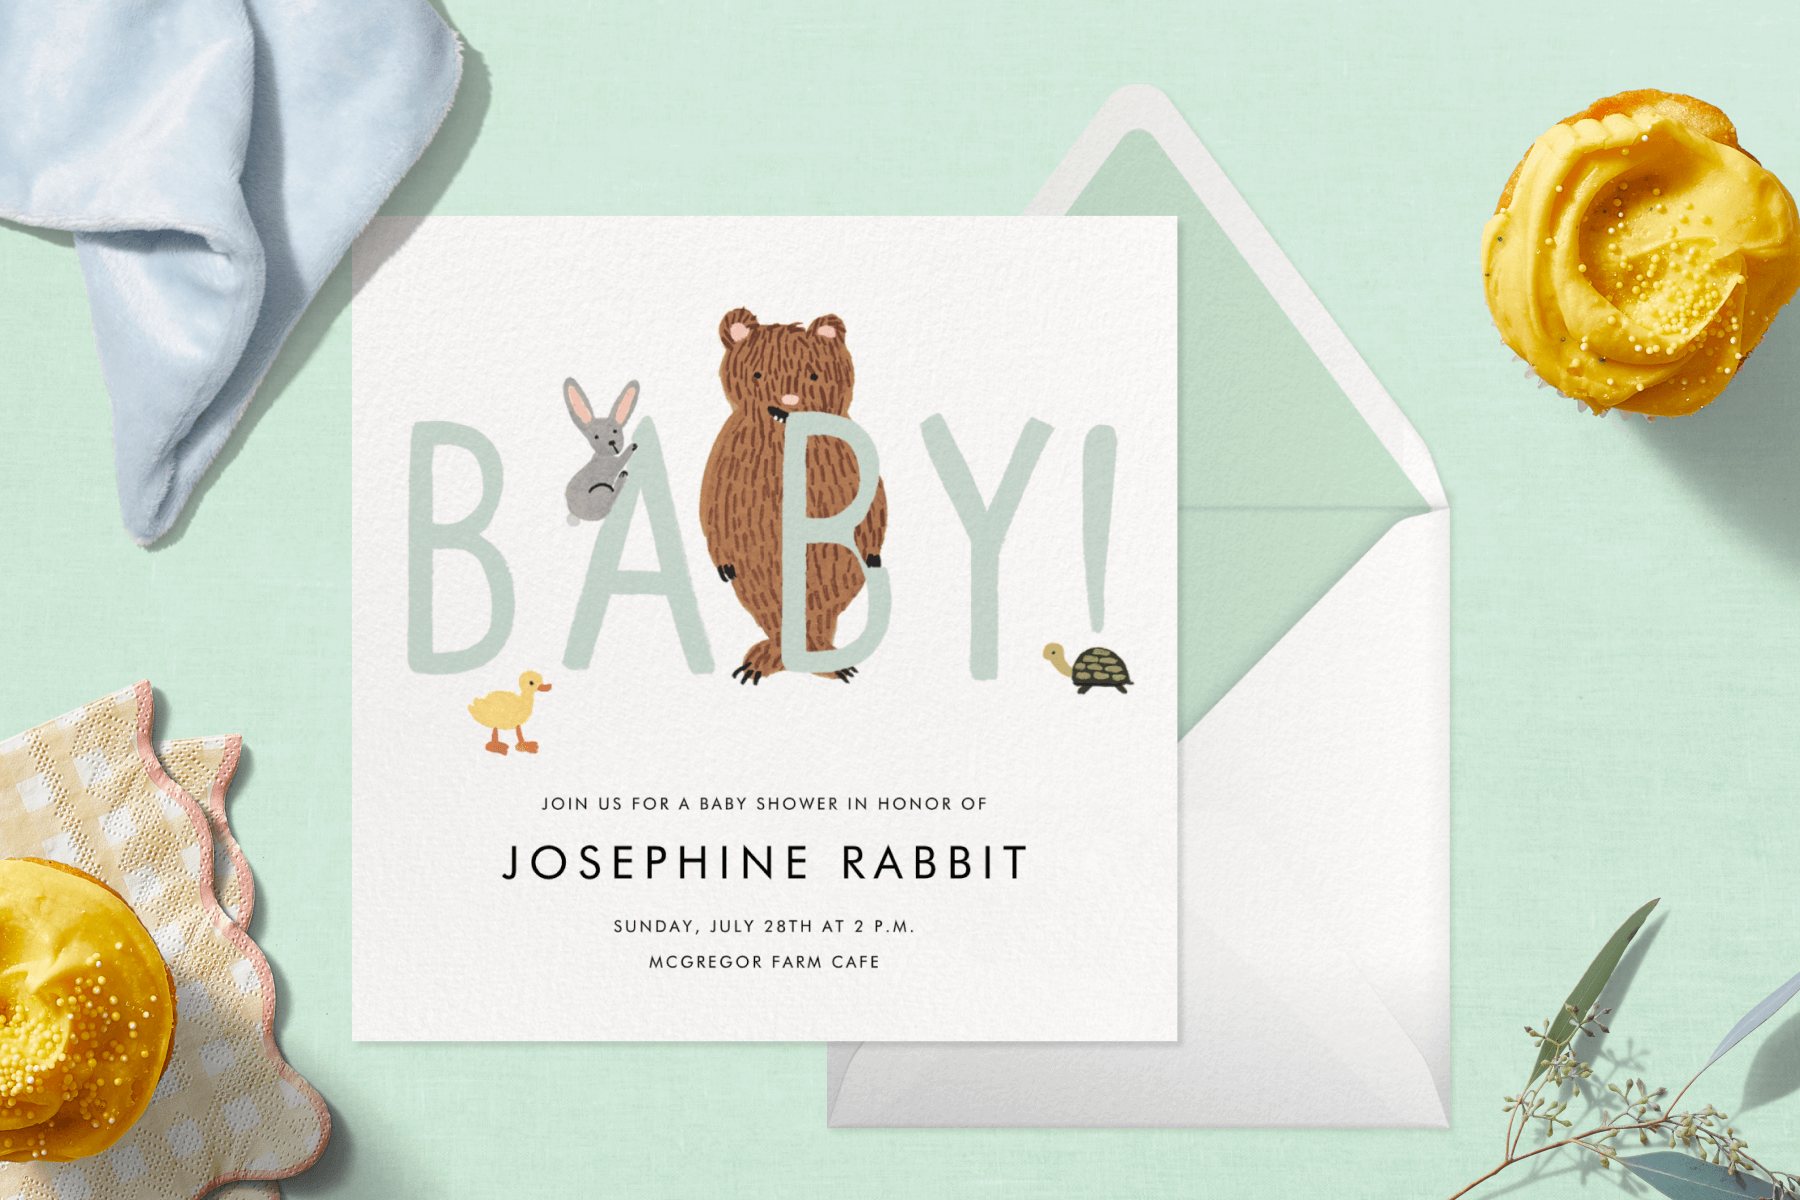 An invitation with a duckling, rabbit, bear, and turtle and the word BABY! surrounded by yellow cupcakes and napkins.